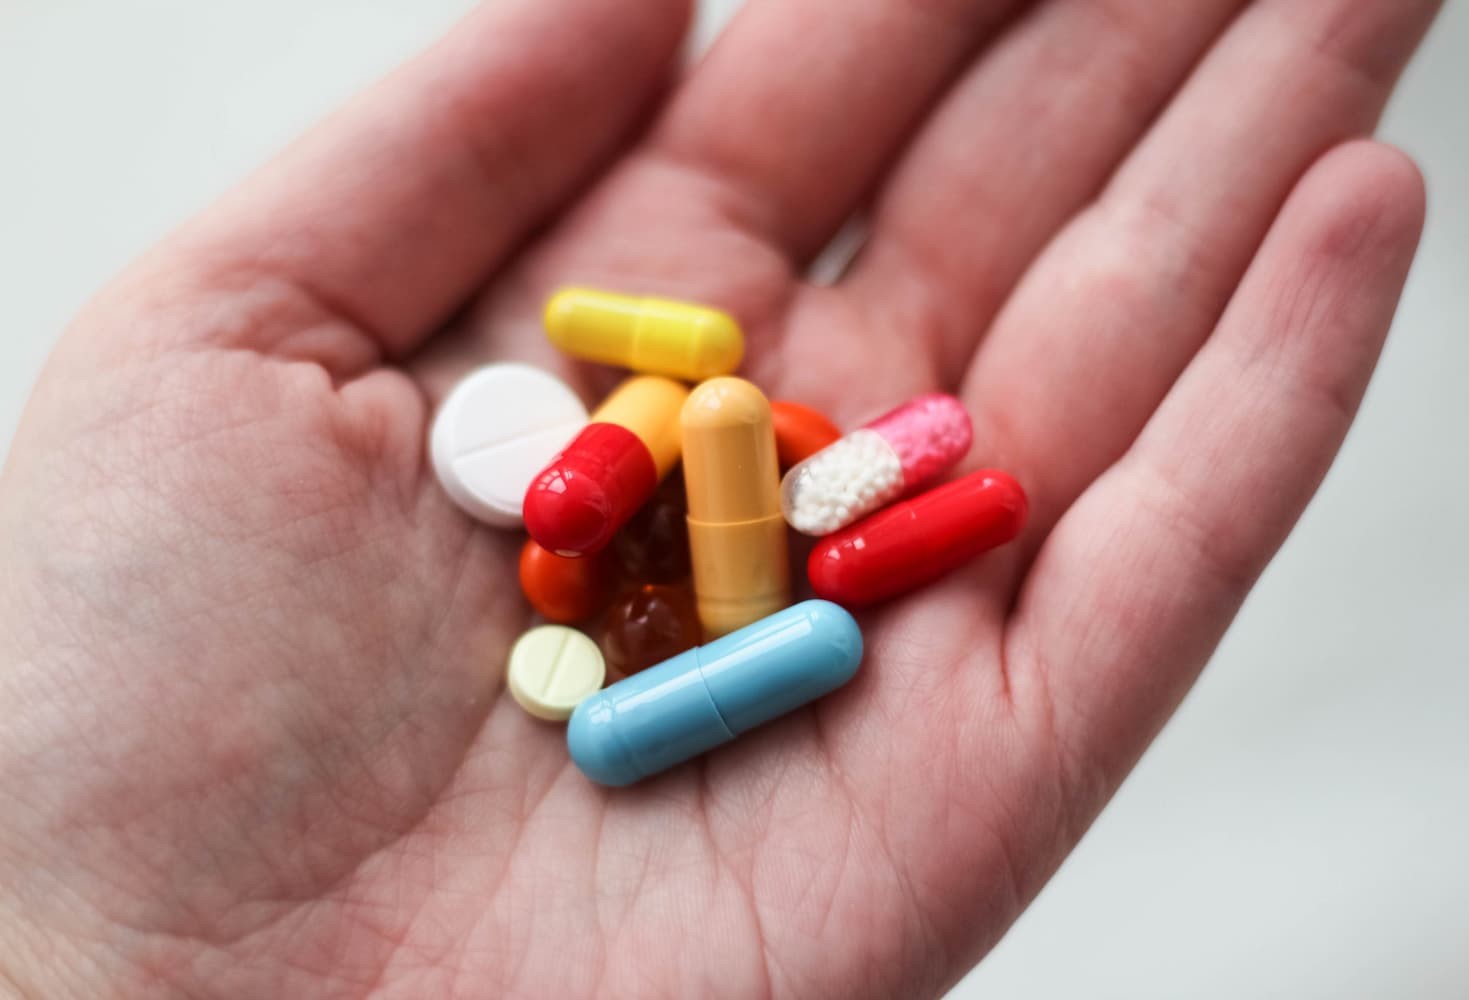 The Truth About Dietary Supplements: Are They Good or Bad?